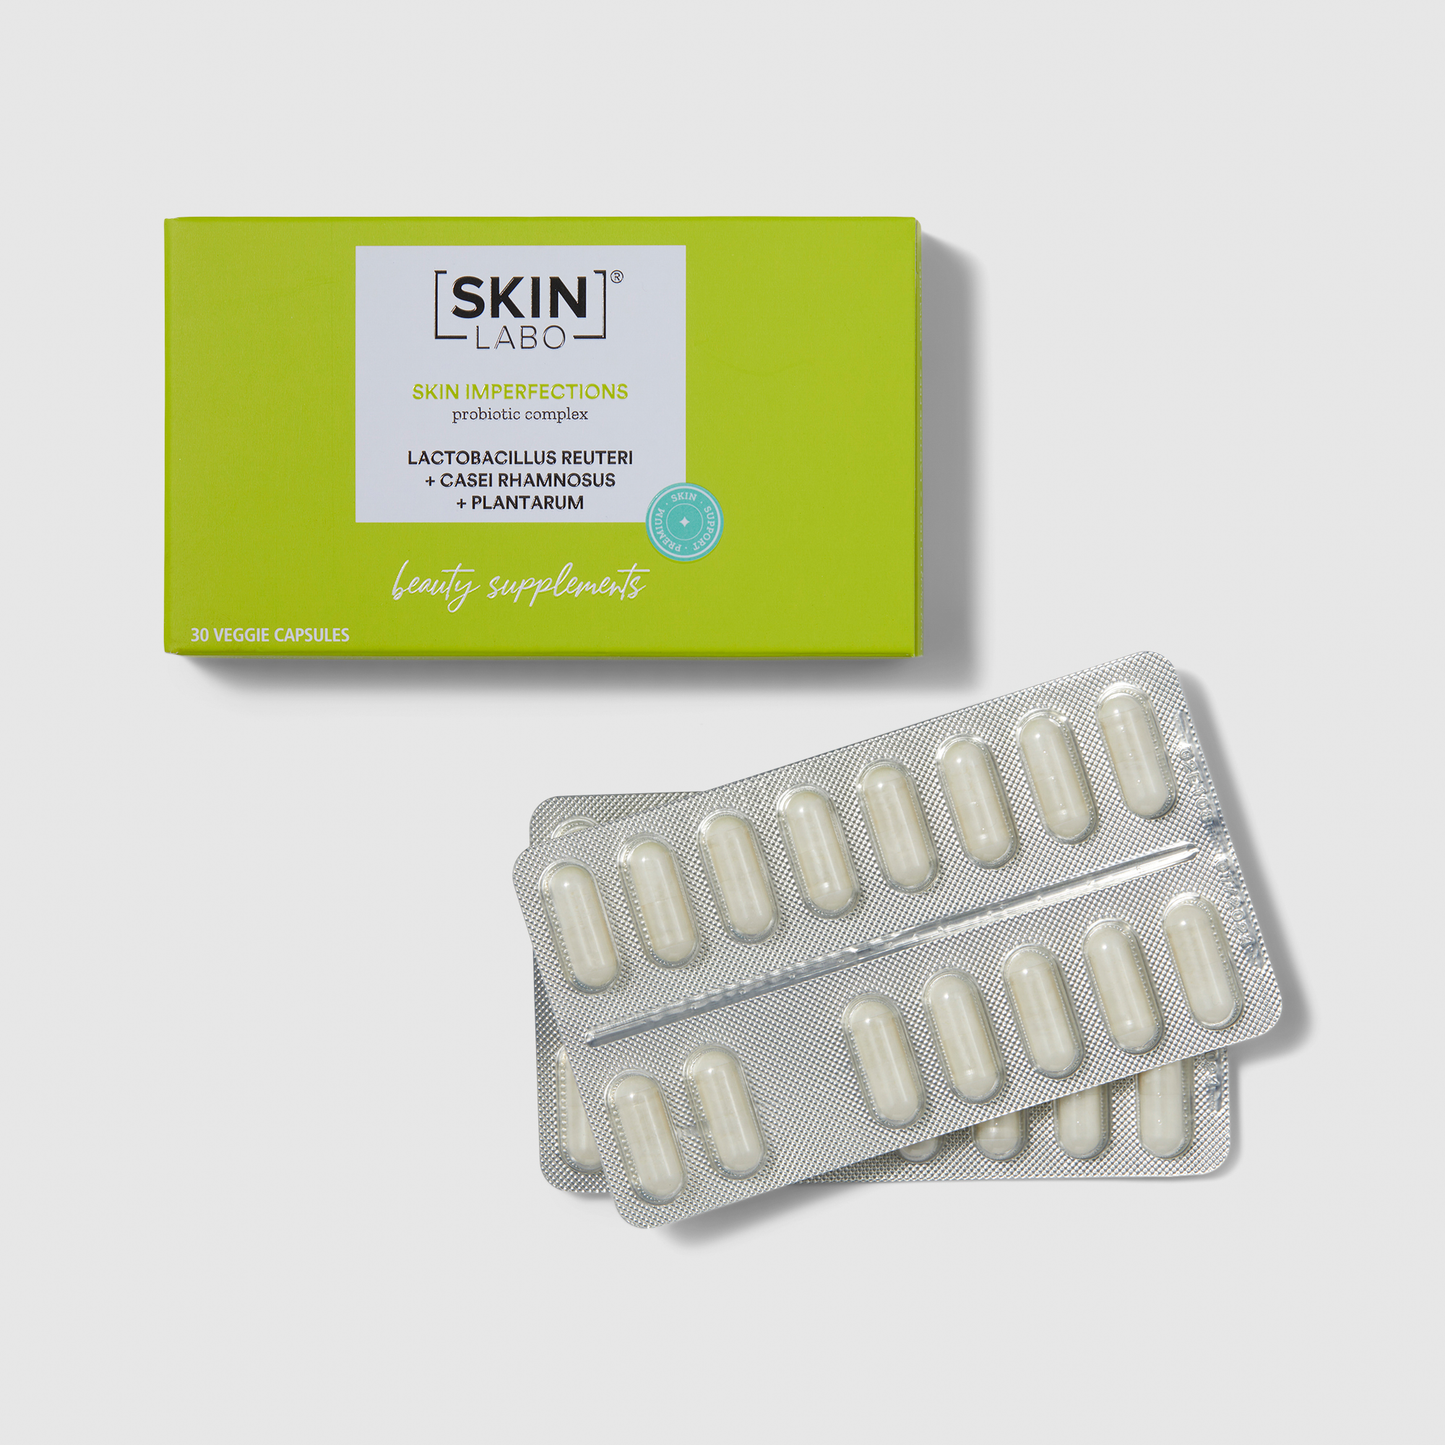 SKIN IMPERFECTIONS - FOOD SUPPLEMENT WITH PROBIOTICS